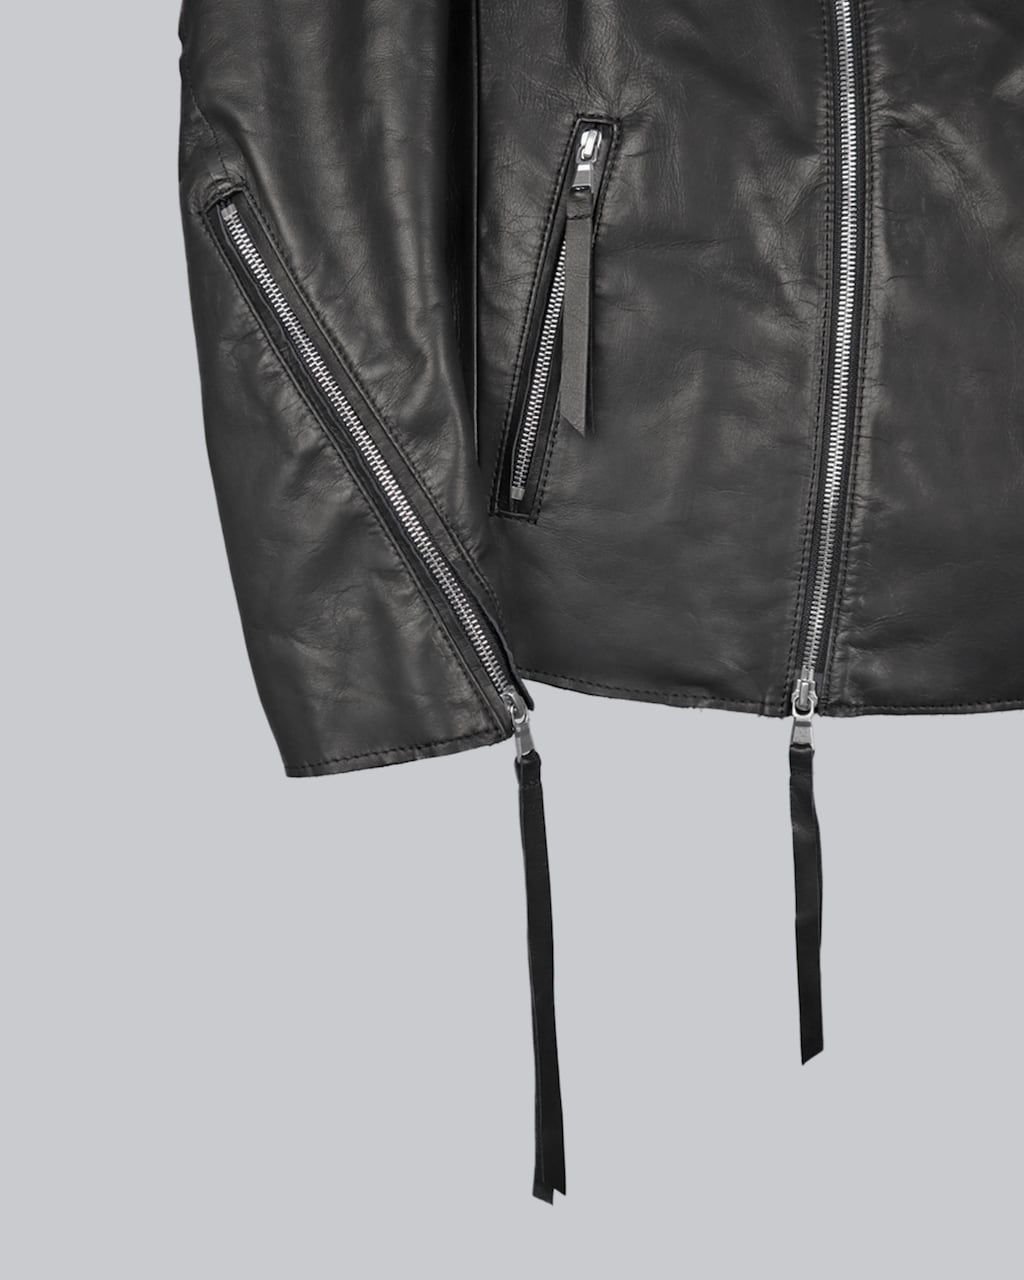 ASKYY / CURVED ZIPPER LEATHER RIDERS JACKET   ASKYY TOKYO